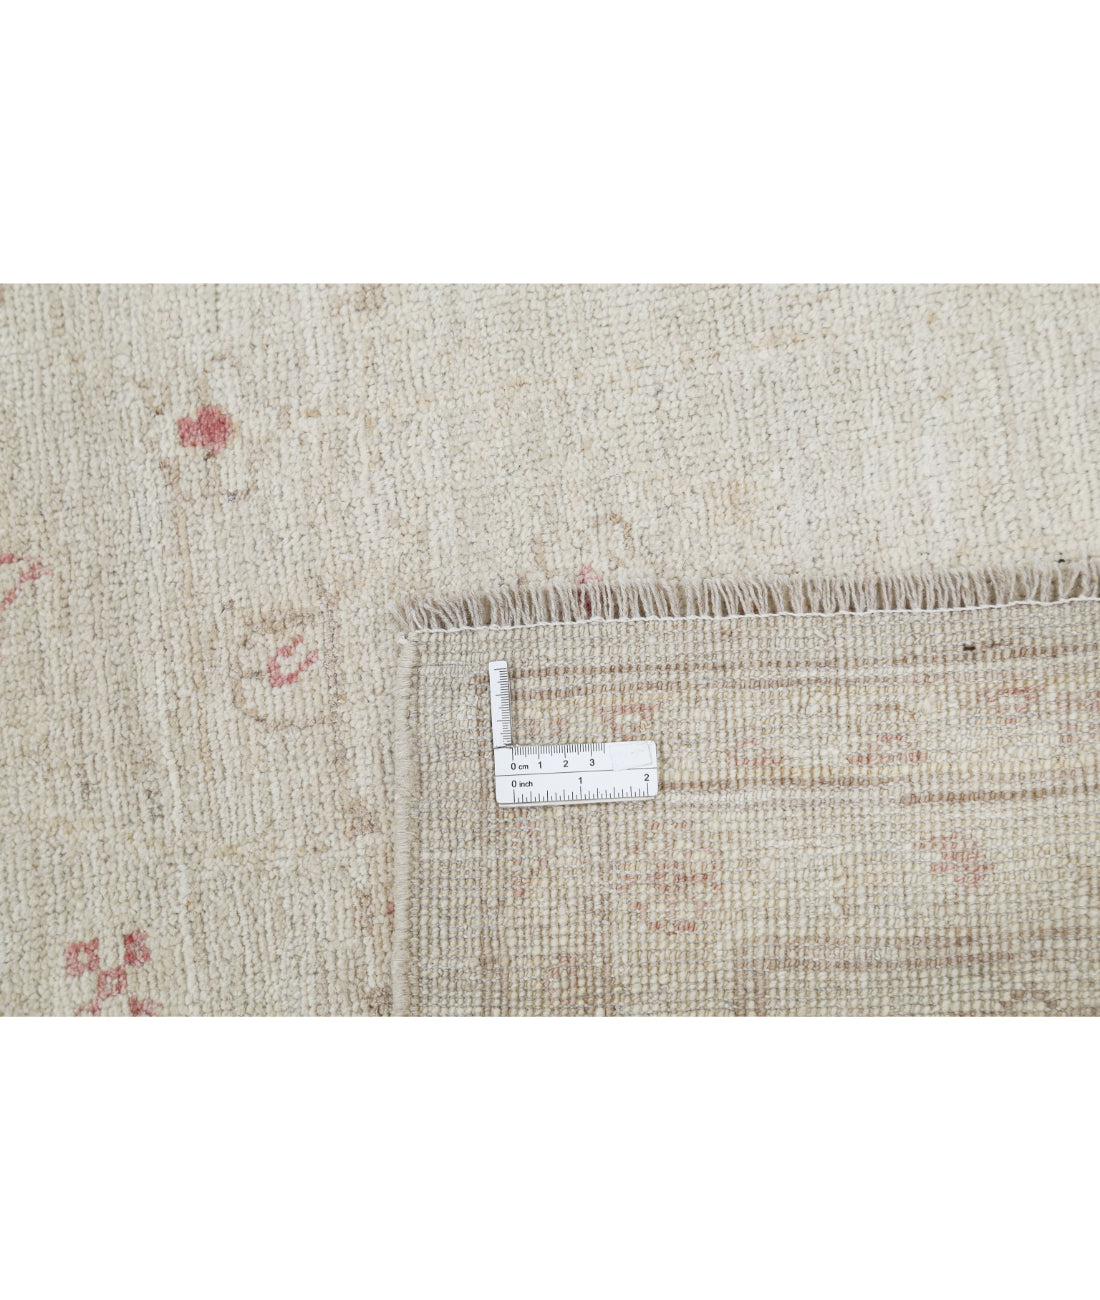 Hand Knotted Oushak Wool Rug - 8'9'' x 11'6'' 8'9'' x 11'6'' (263 X 345) / Beige / Ivory